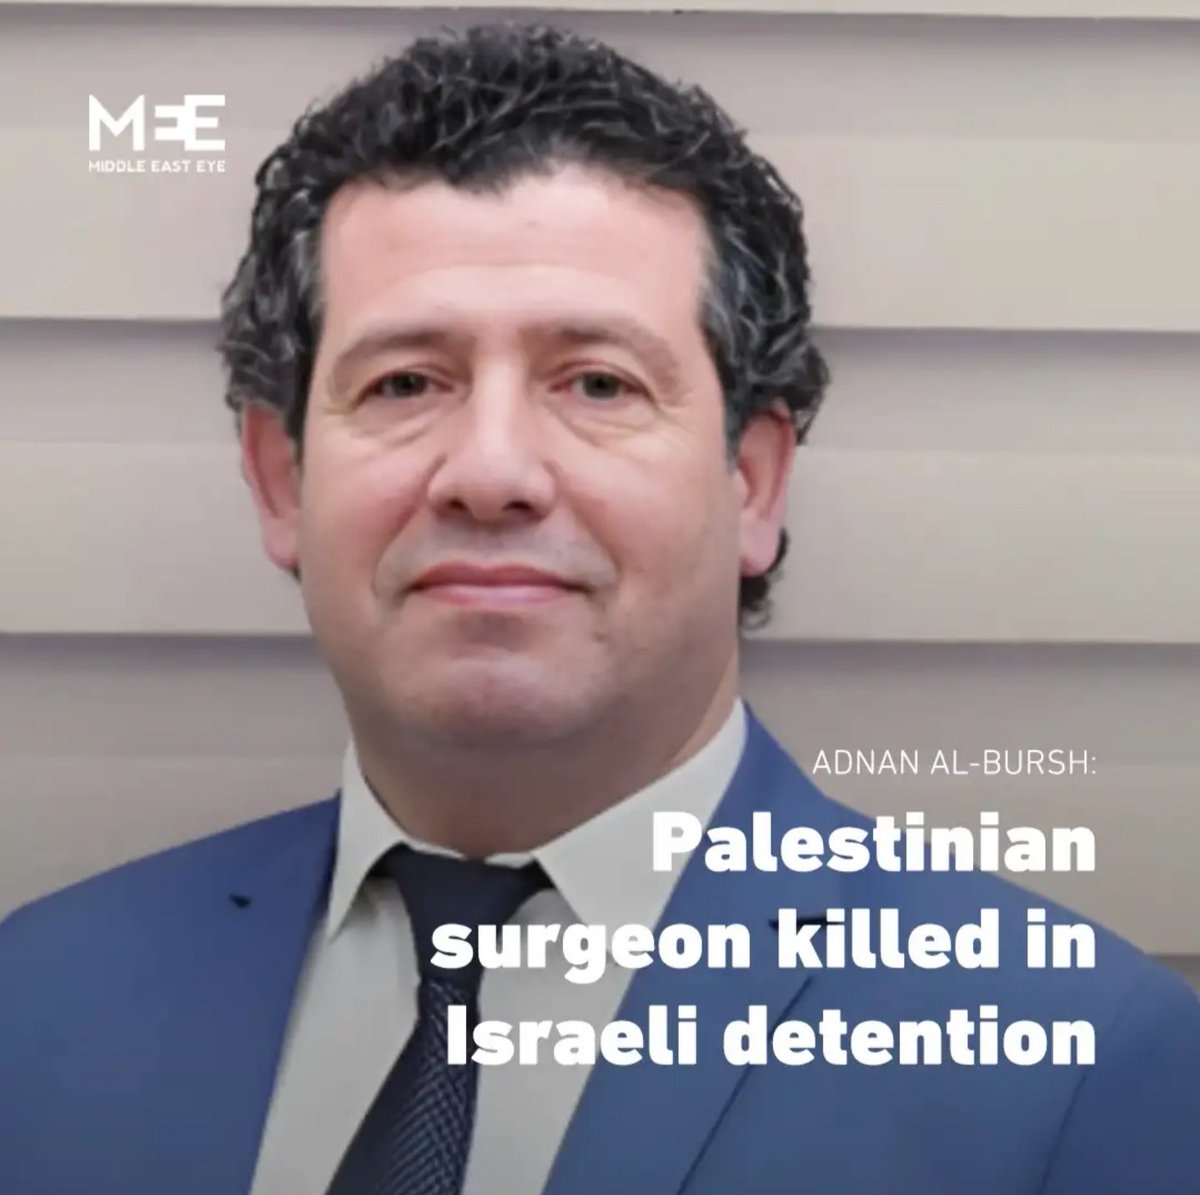 A Palestinian surgeon and professor of orthopedic medicine, has been killed as a result of being tortured while in Israeli detention. Bursh was arrested late last year while working at Al-Awda Hospital.

He was killed on April 19th